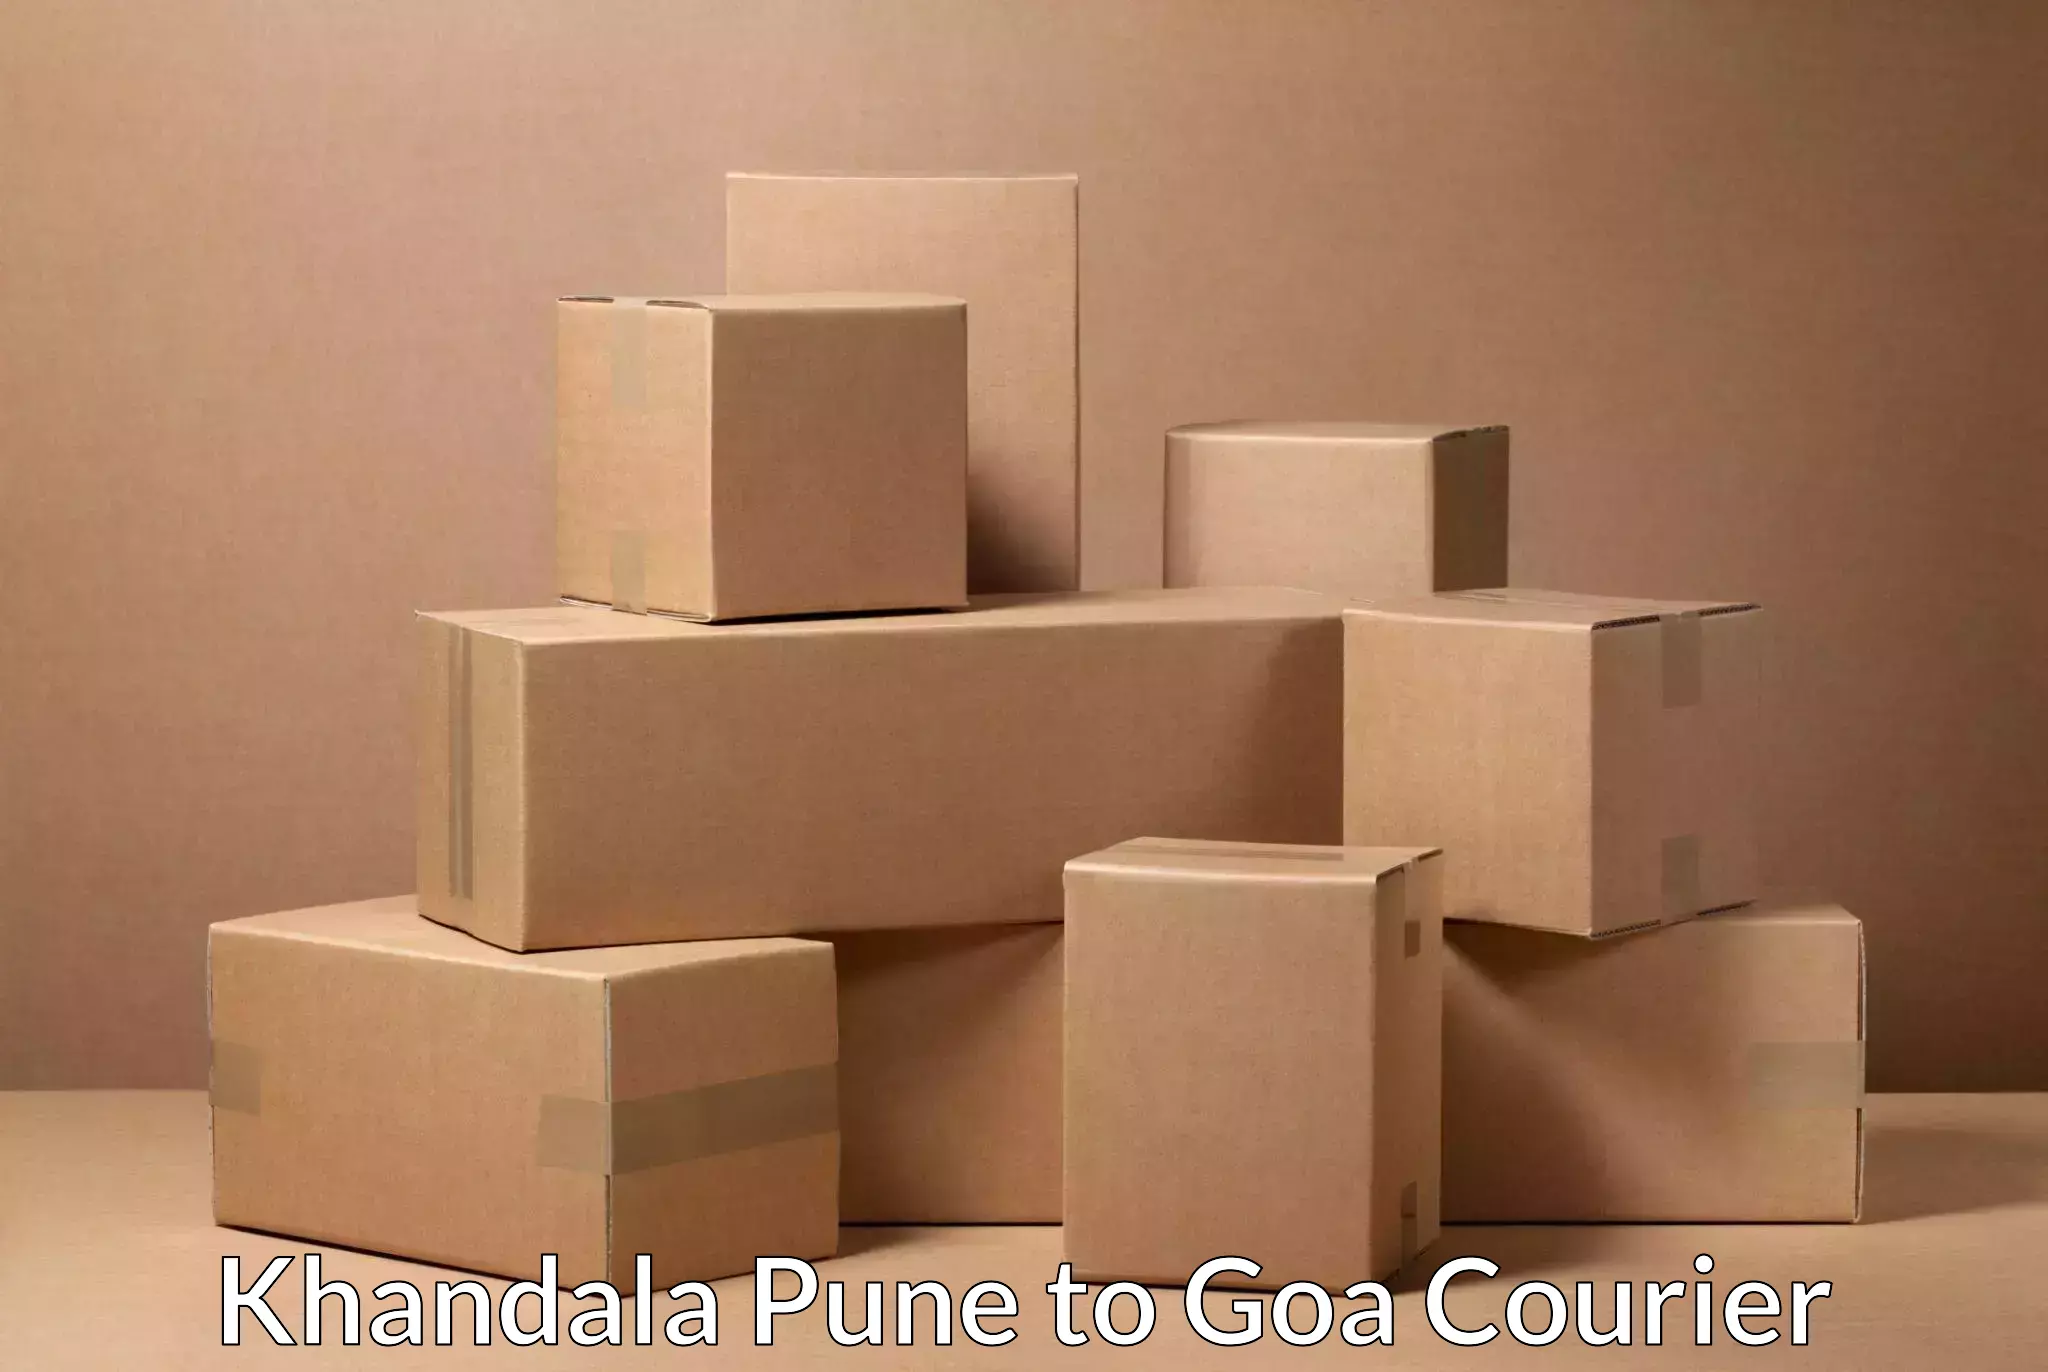 Small parcel delivery Khandala Pune to Goa